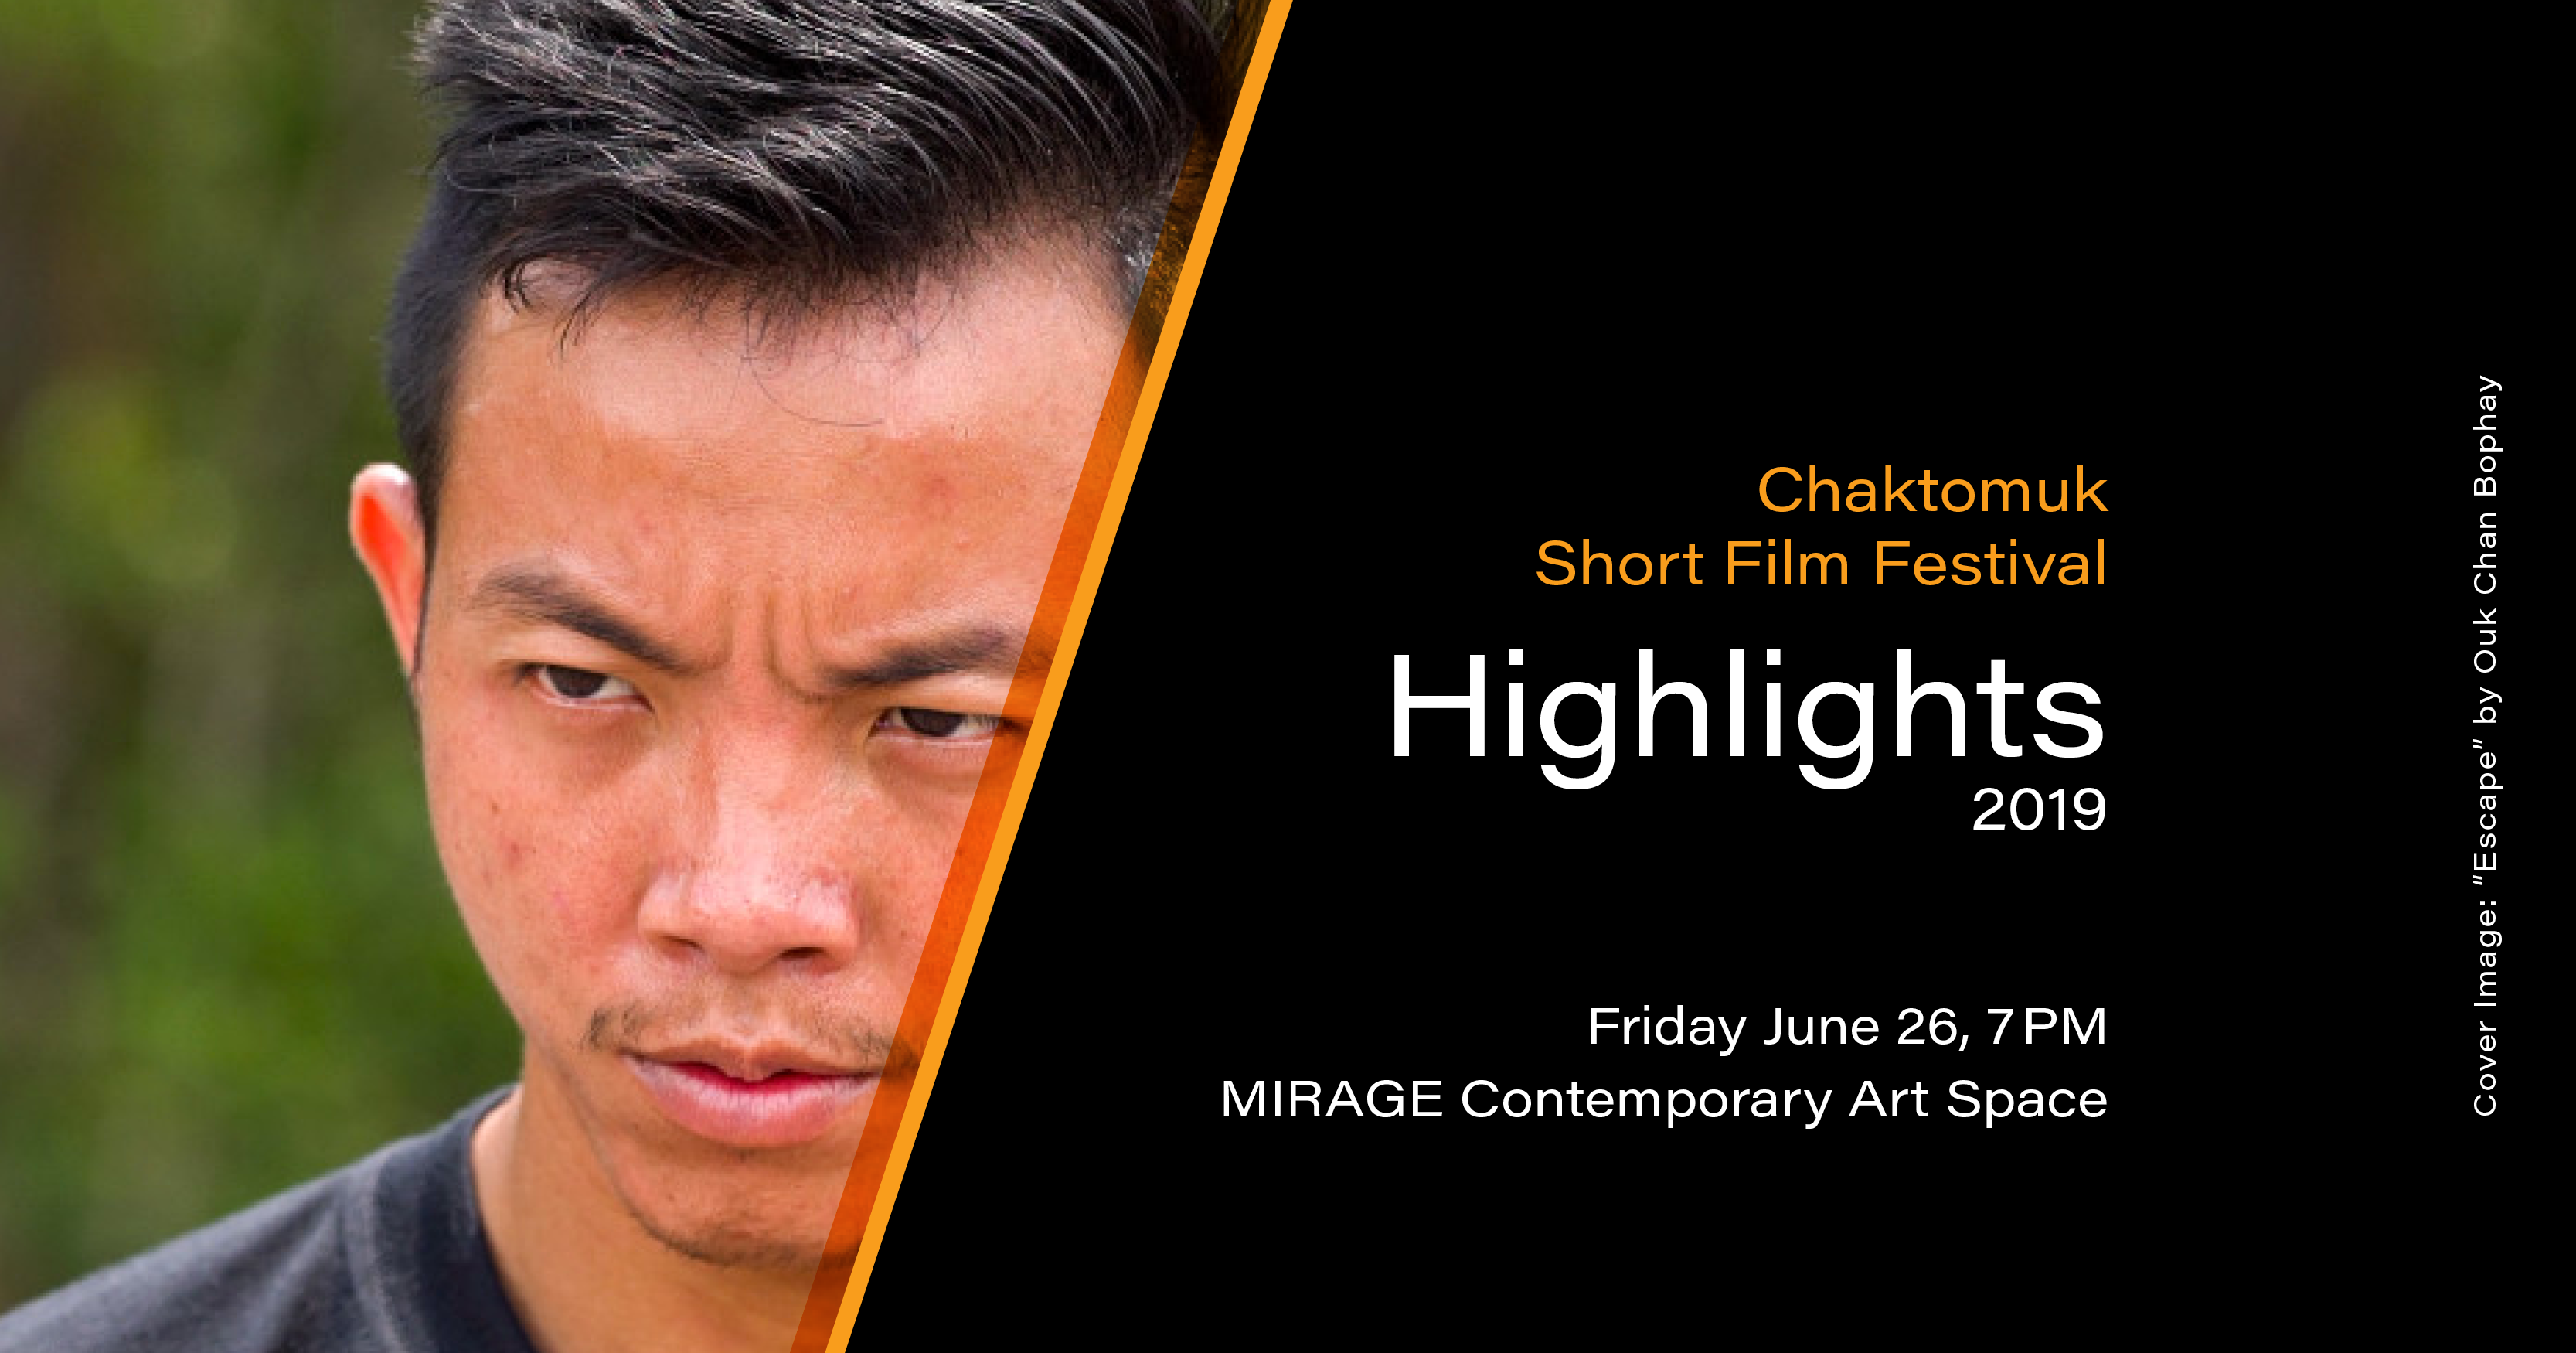 Chaktomuk Short Film Festival at MIRAGE Contemporary Art Space in Siem Reap, Cambodia